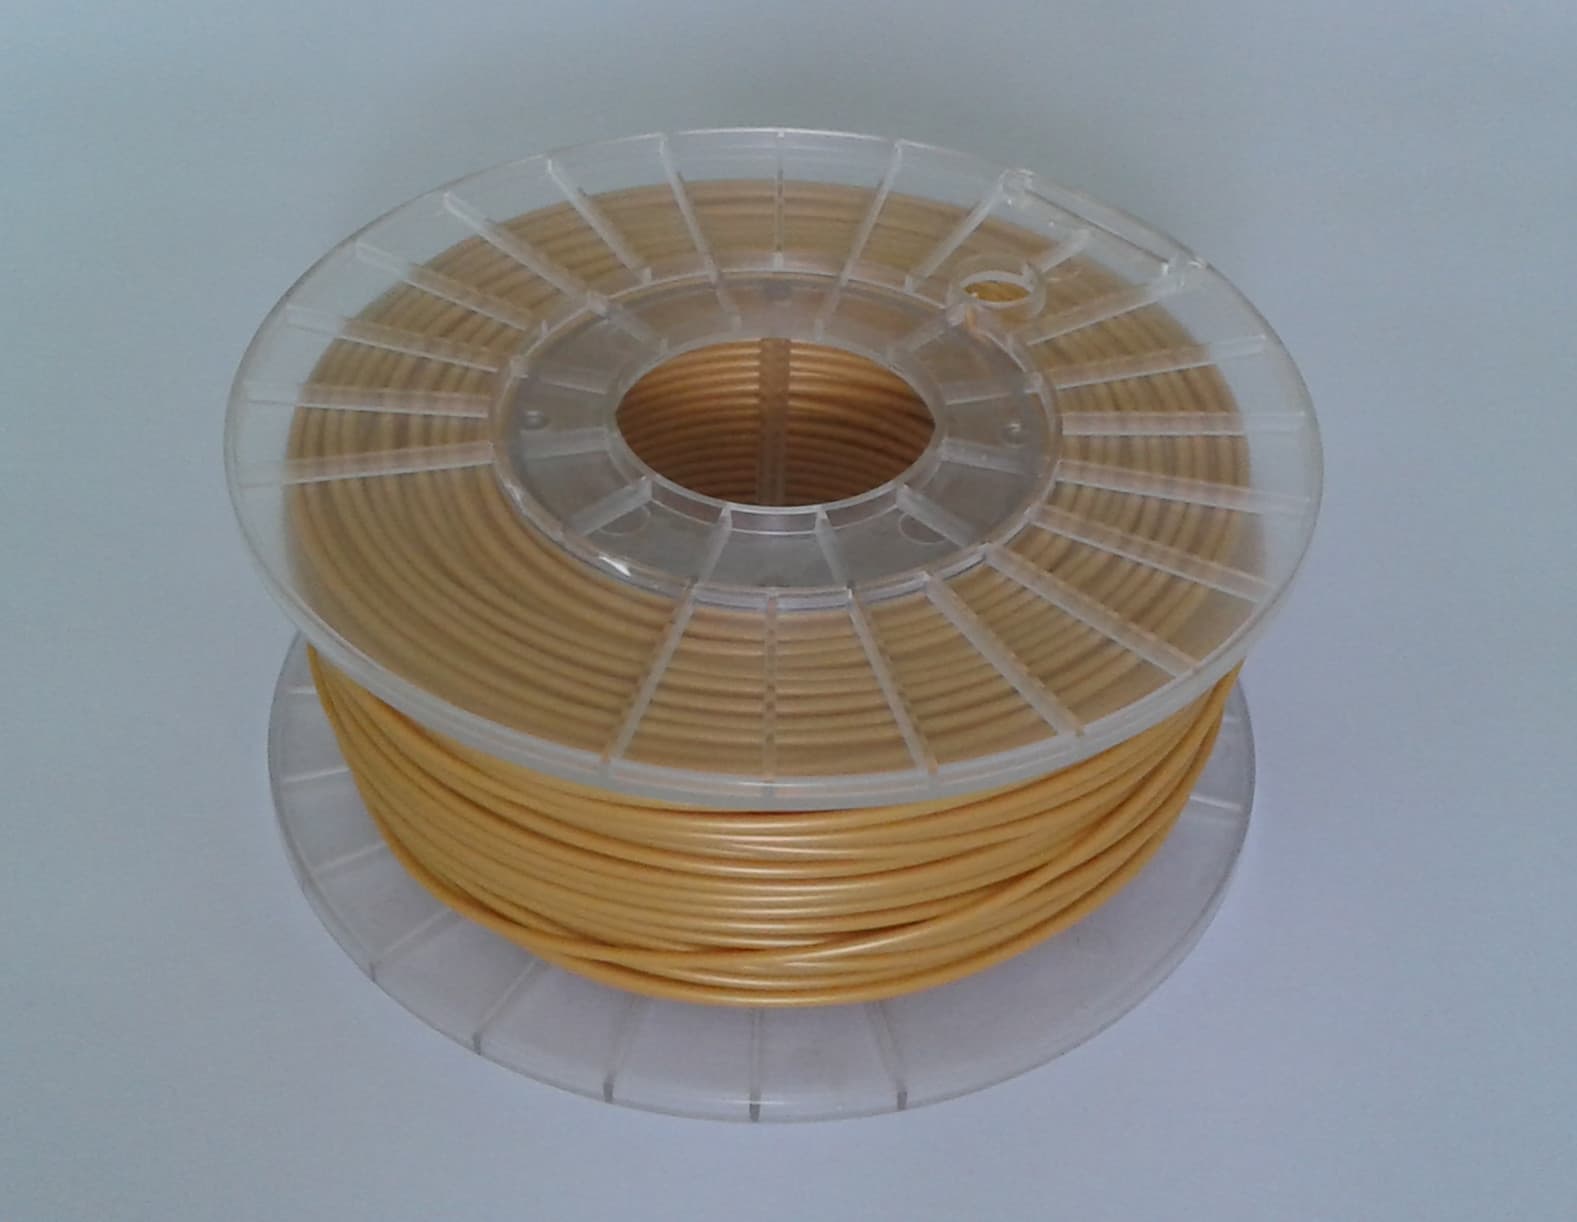 Factory sell high quality PLA 1.75MM filament